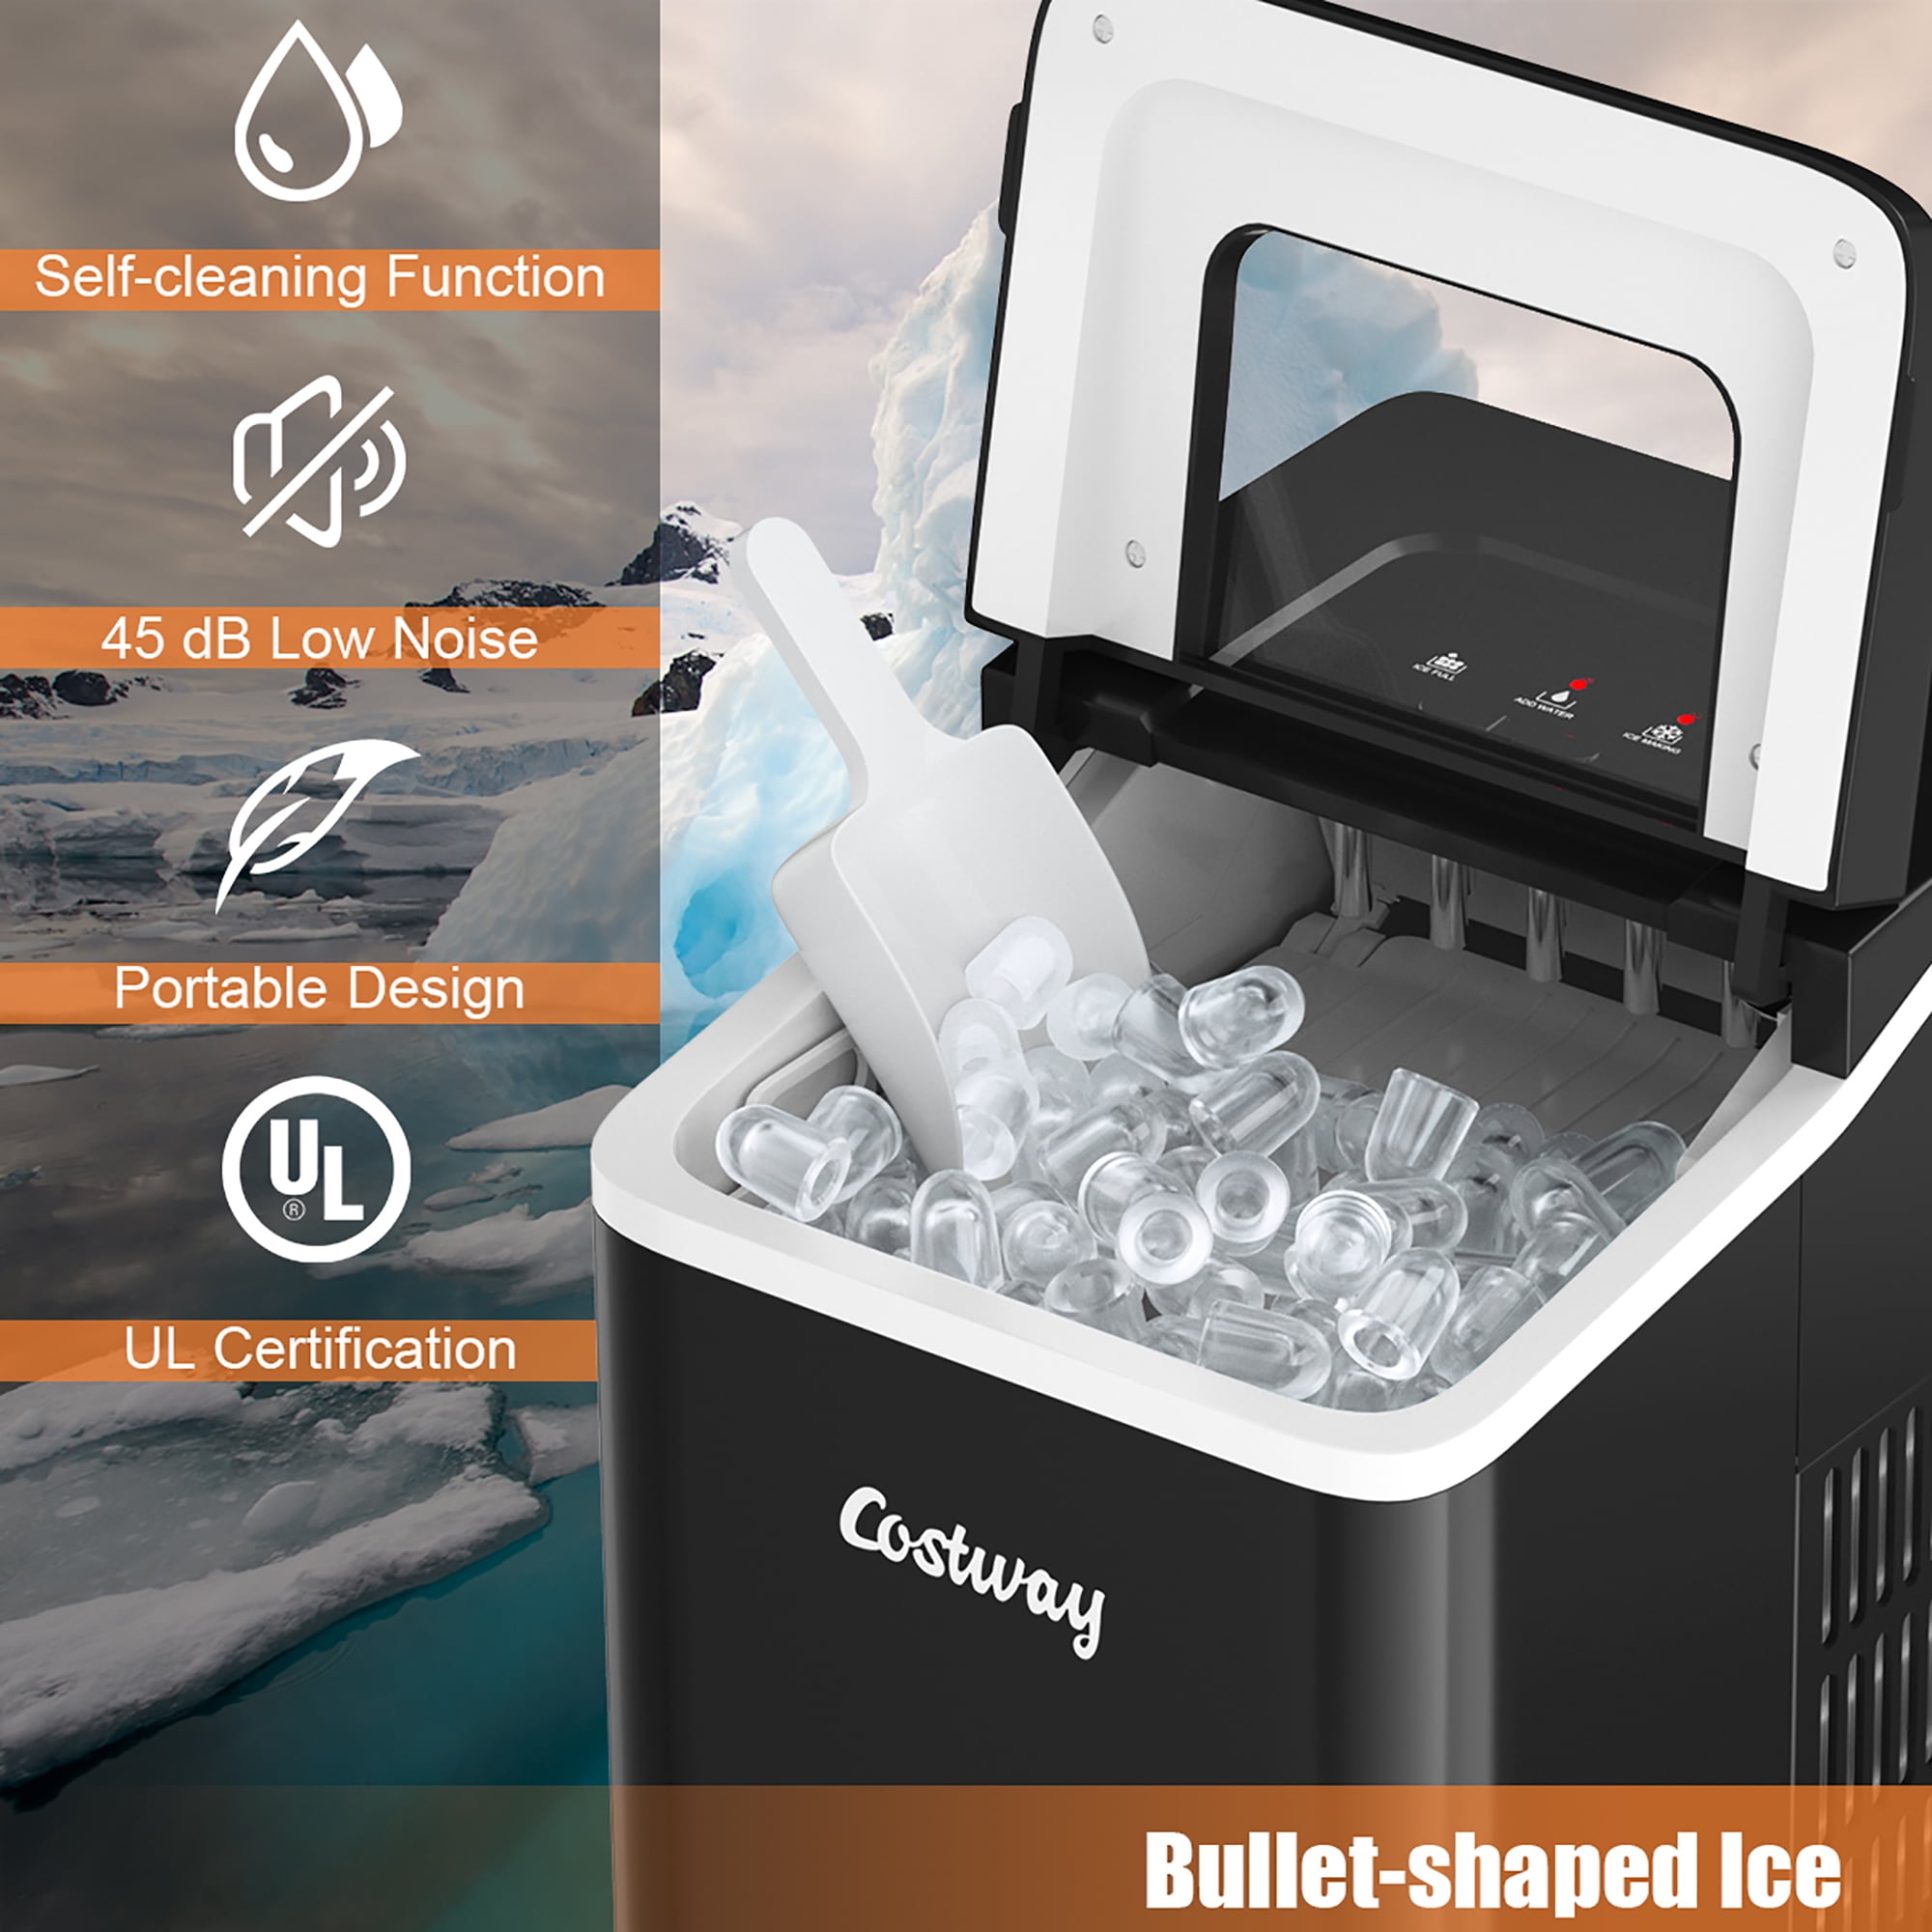 Costway Portable Ice Maker Machine Countertop 26LBS/24H LCD Display w/ -  14.5''x10''x12''(LxWxH) - Bed Bath & Beyond - 32092143